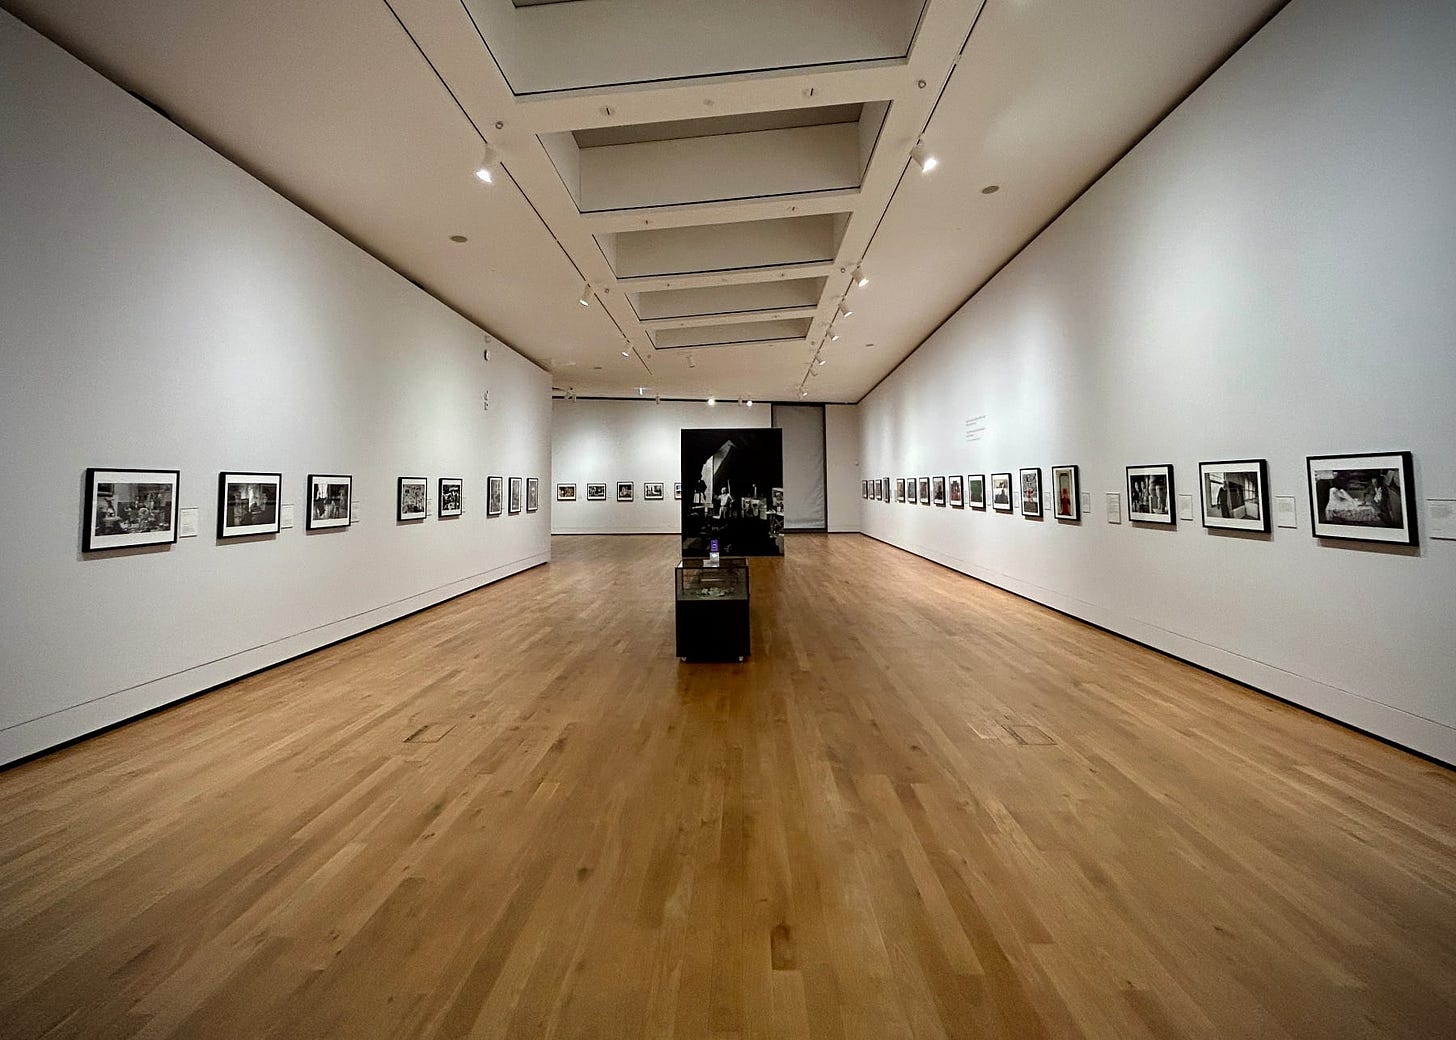 This photo showcases the 'Where Ideas Are Born' photography exhibition at Aberdeen Art Gallery. The gallery space is wide and welcoming with a polished wooden floor leading to a central dark panel, creating a corridor-like effect. Both sides of the walls are lined with framed black and white photographs, evenly spaced and illuminated by ceiling lights. The exhibit seems to offer a quiet, contemplative atmosphere, inviting visitors to immerse themselves in the visual storytelling of the photographs.